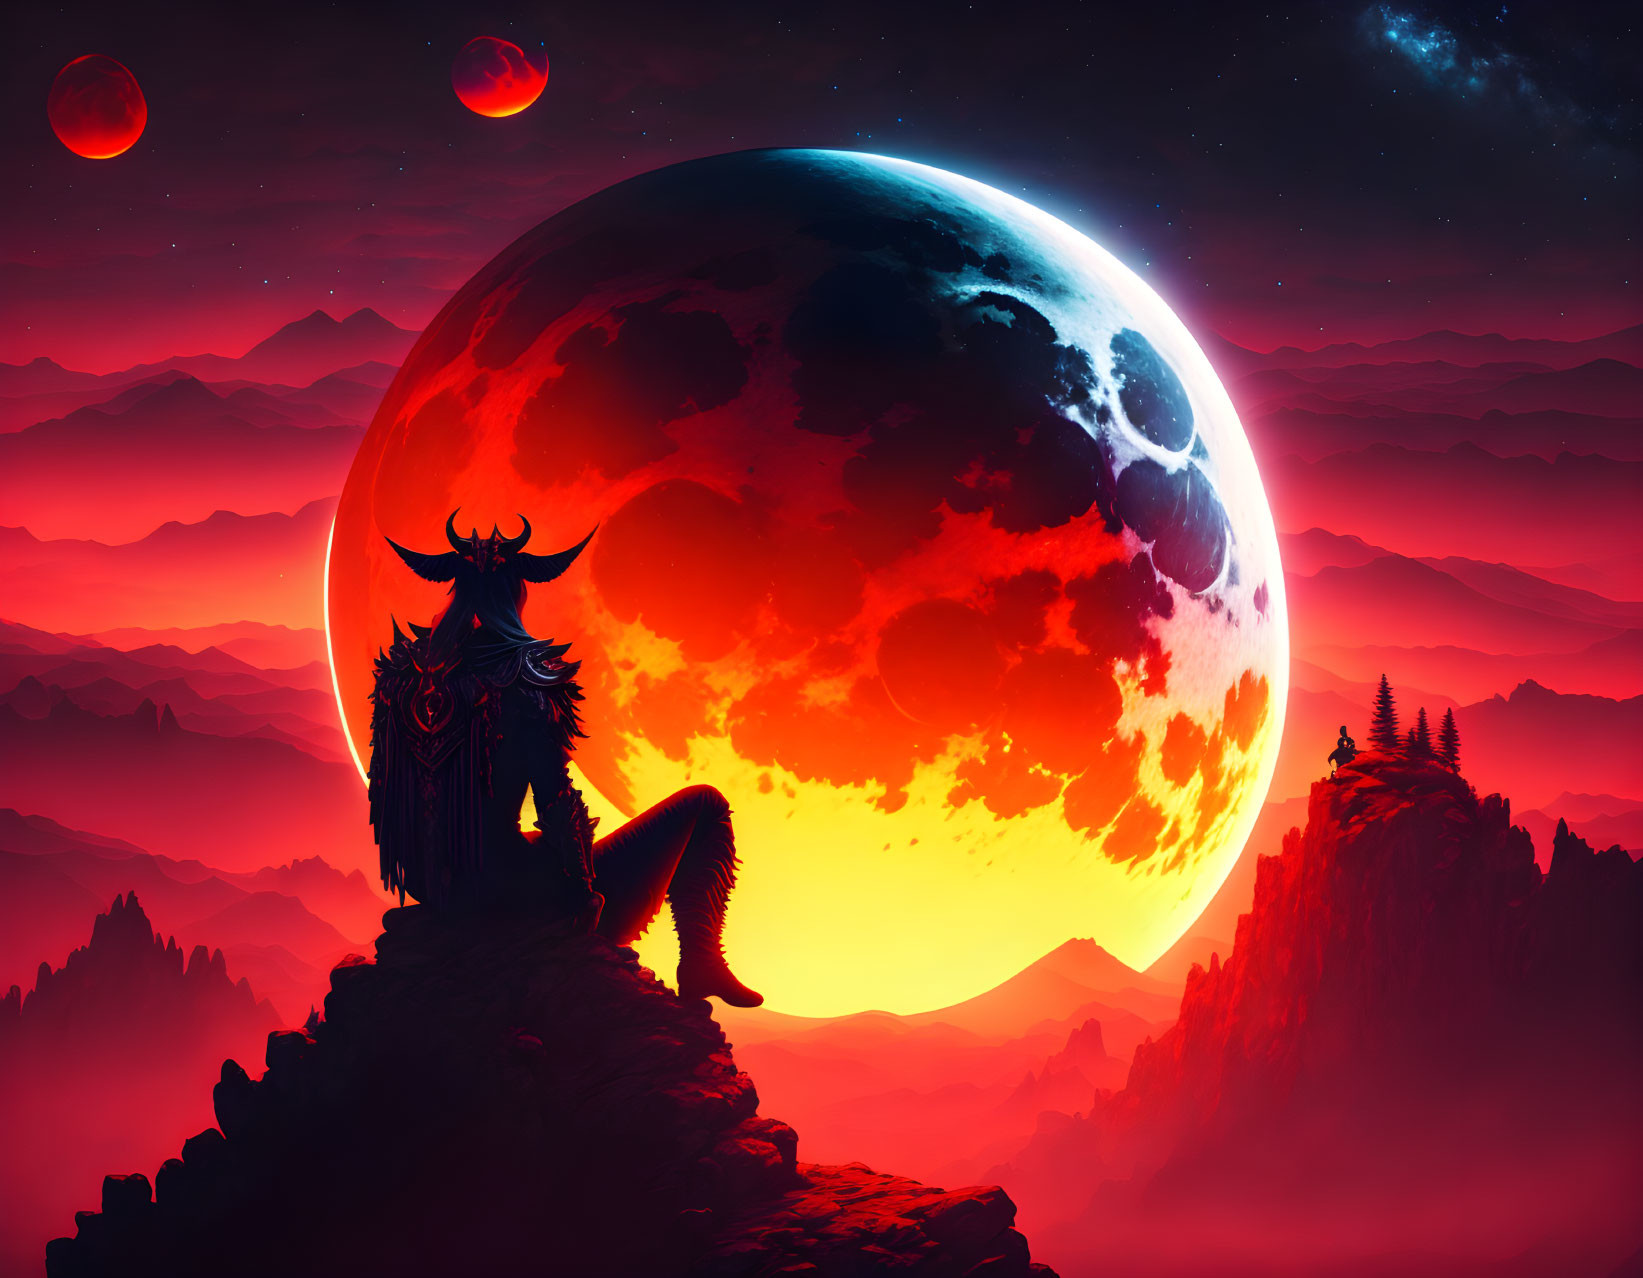 Fantasy scene with large moon, red sky, planets, and horned figure on mountain.